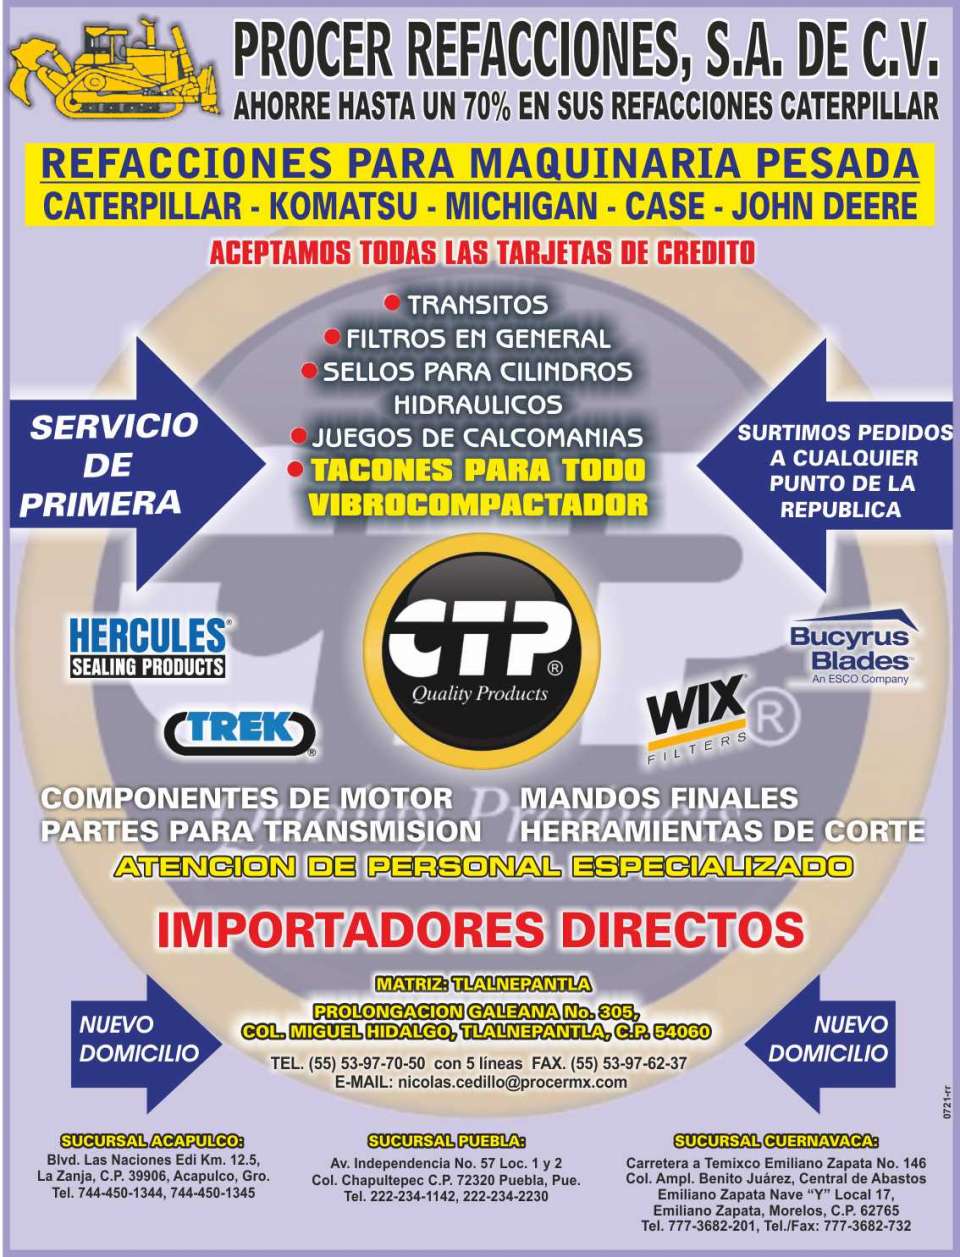 Parts for Heavy Machinery, Transit, Filters in General, Seals for Cylinders, Decals, Heels for all Vibrocompactador, Service of first, Engine Components, Final Controls 